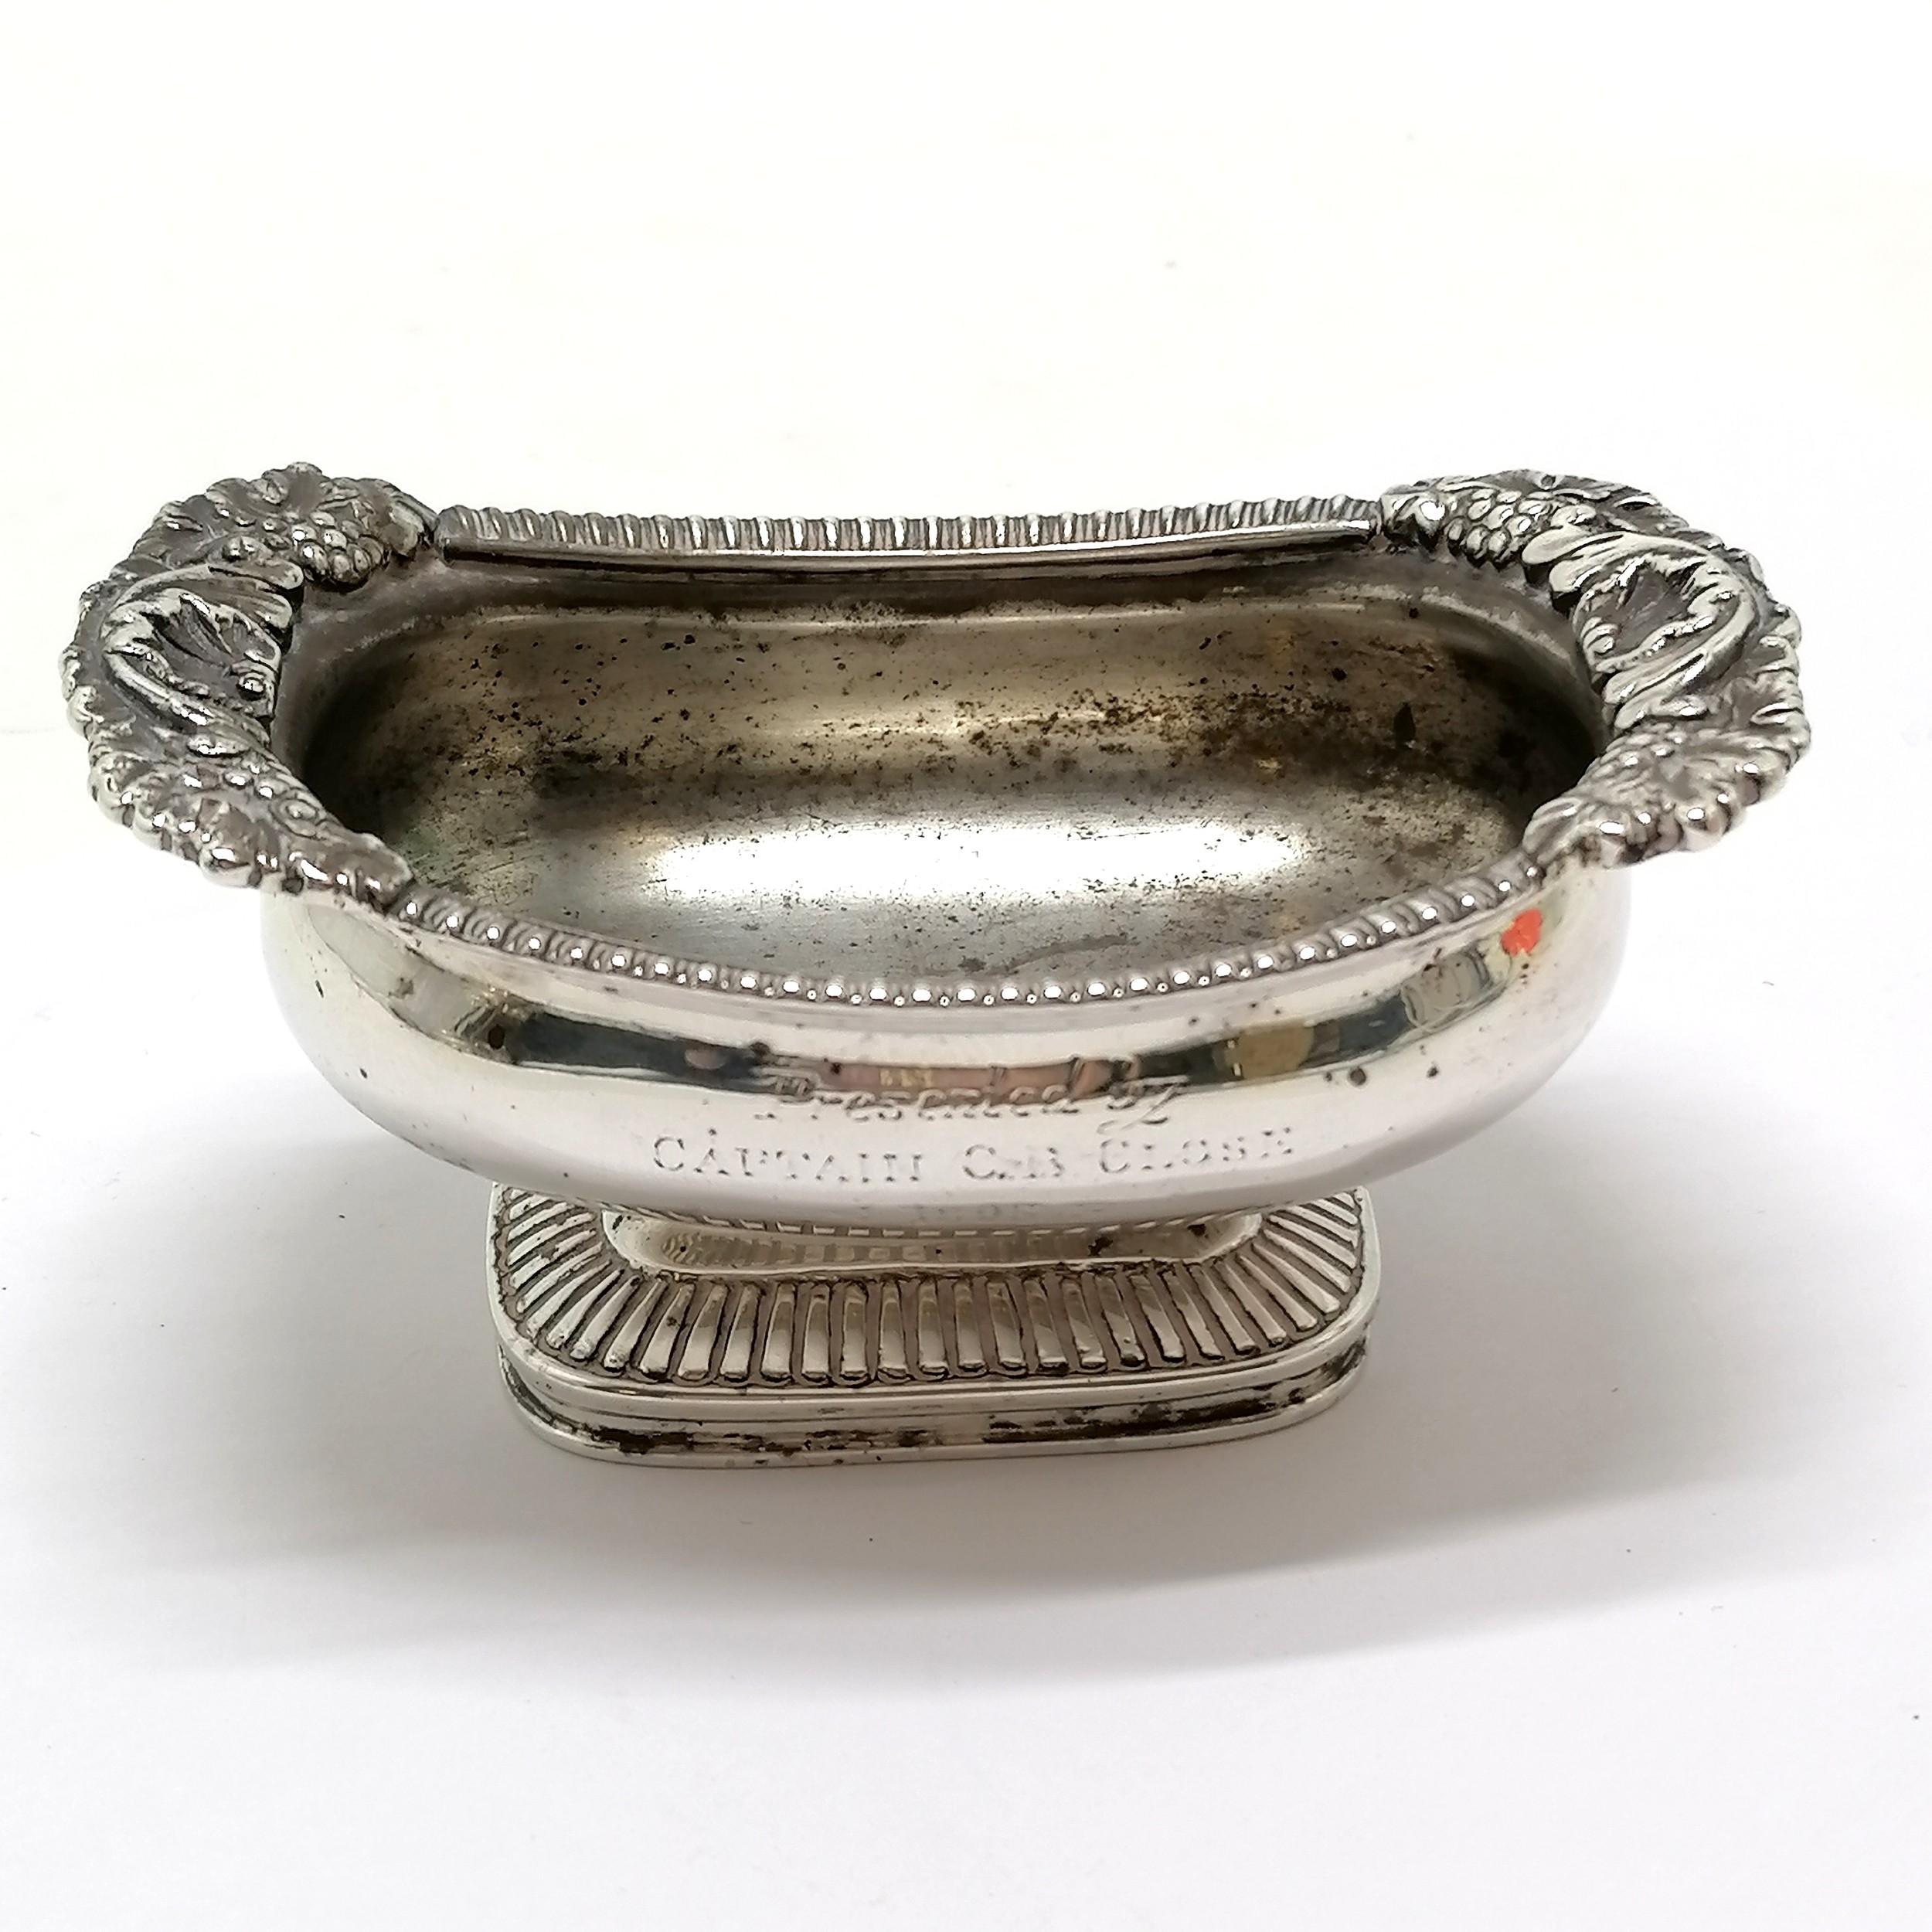 Silver salt cellar by Lambert & Co (George Lambert) with 1895 inscription Presented by Captain C B